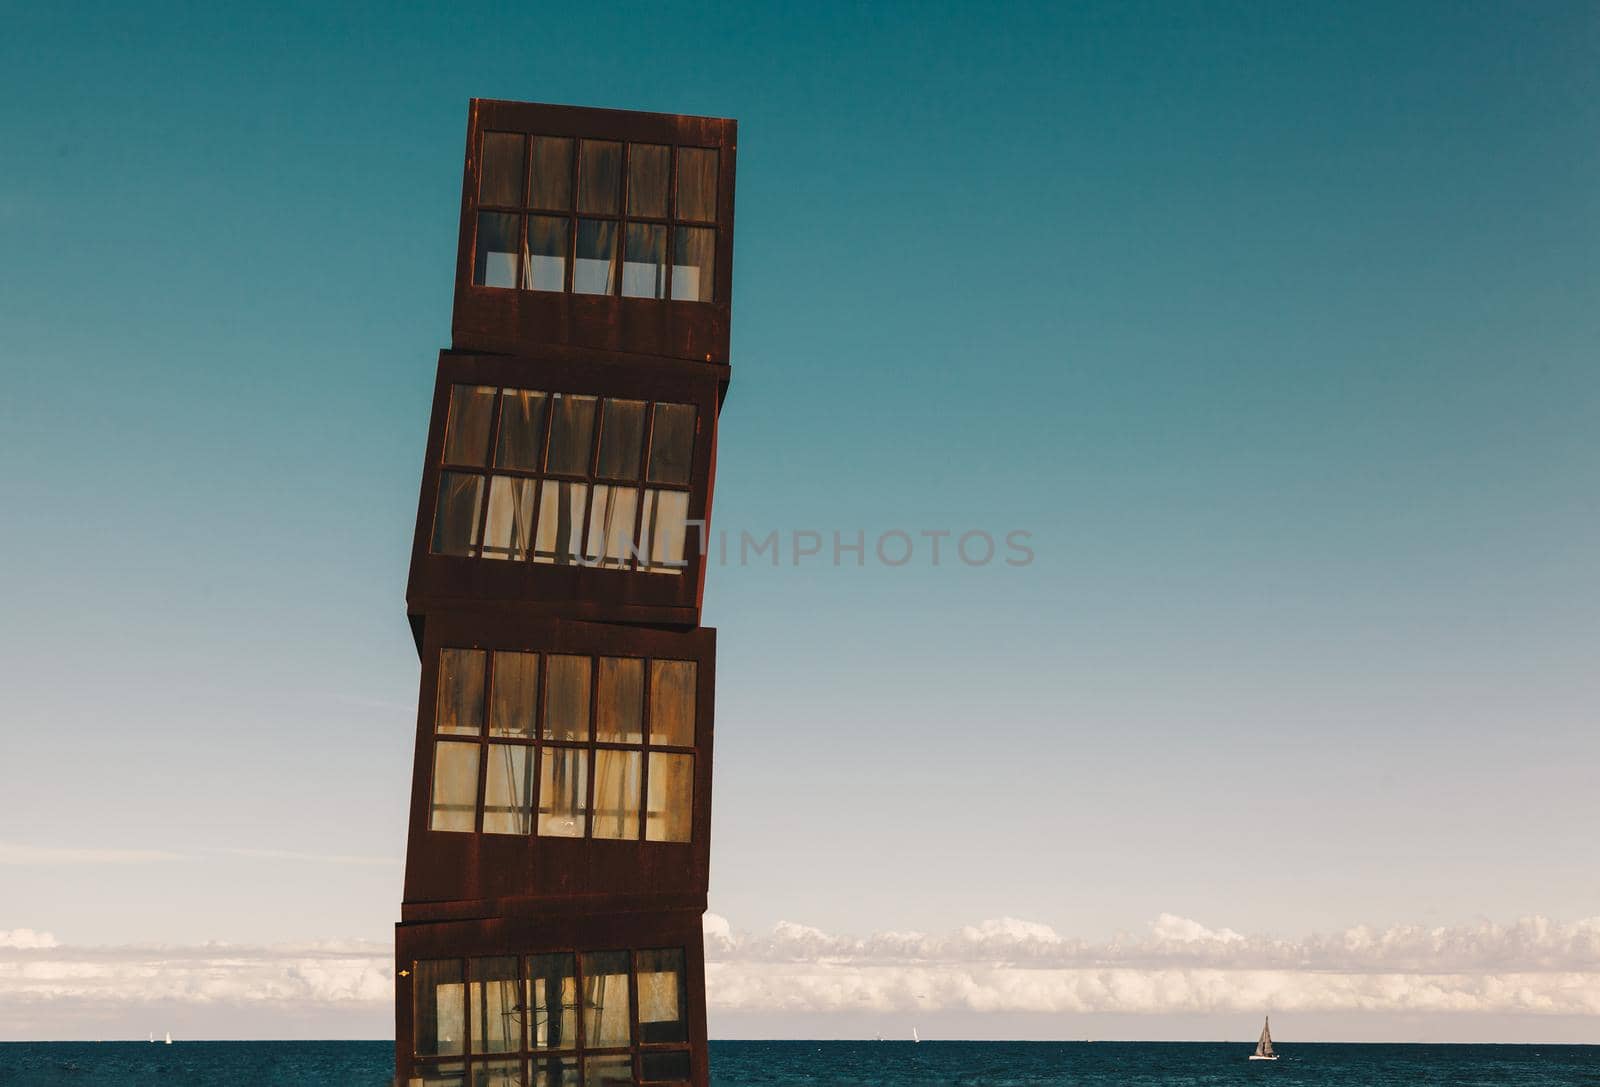 Barcelona, Spain. The sculpture designed by installation artist Rebecca Horn in COR-TEN steel presides over this urban beach. by Sandronize